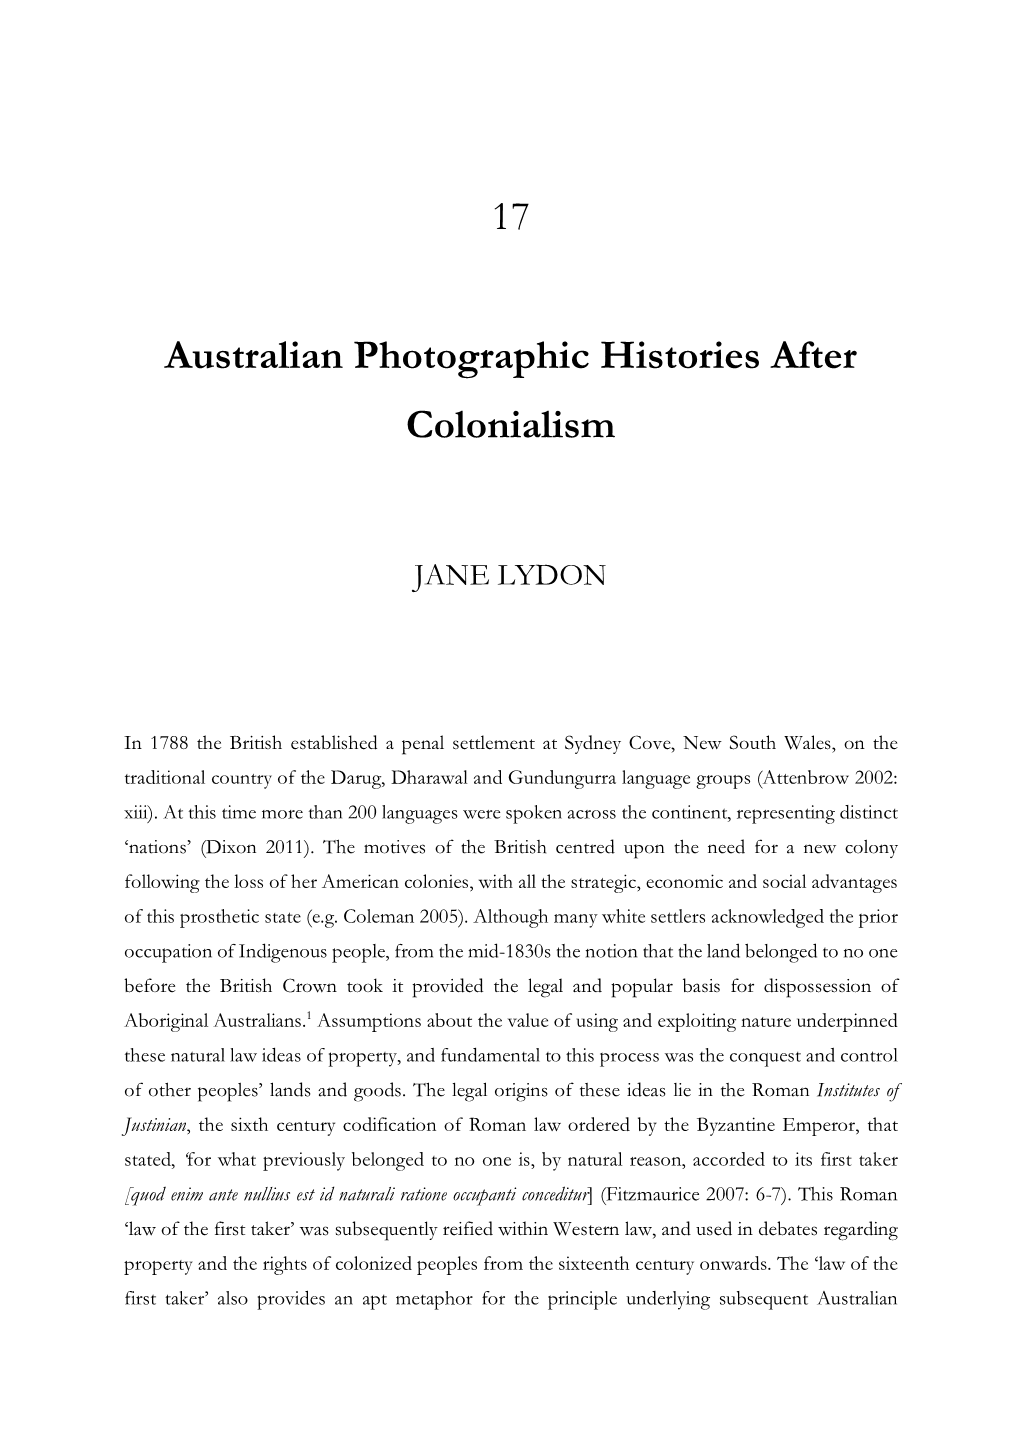 Lydon , J., 2020 Australian Photographic Histories After